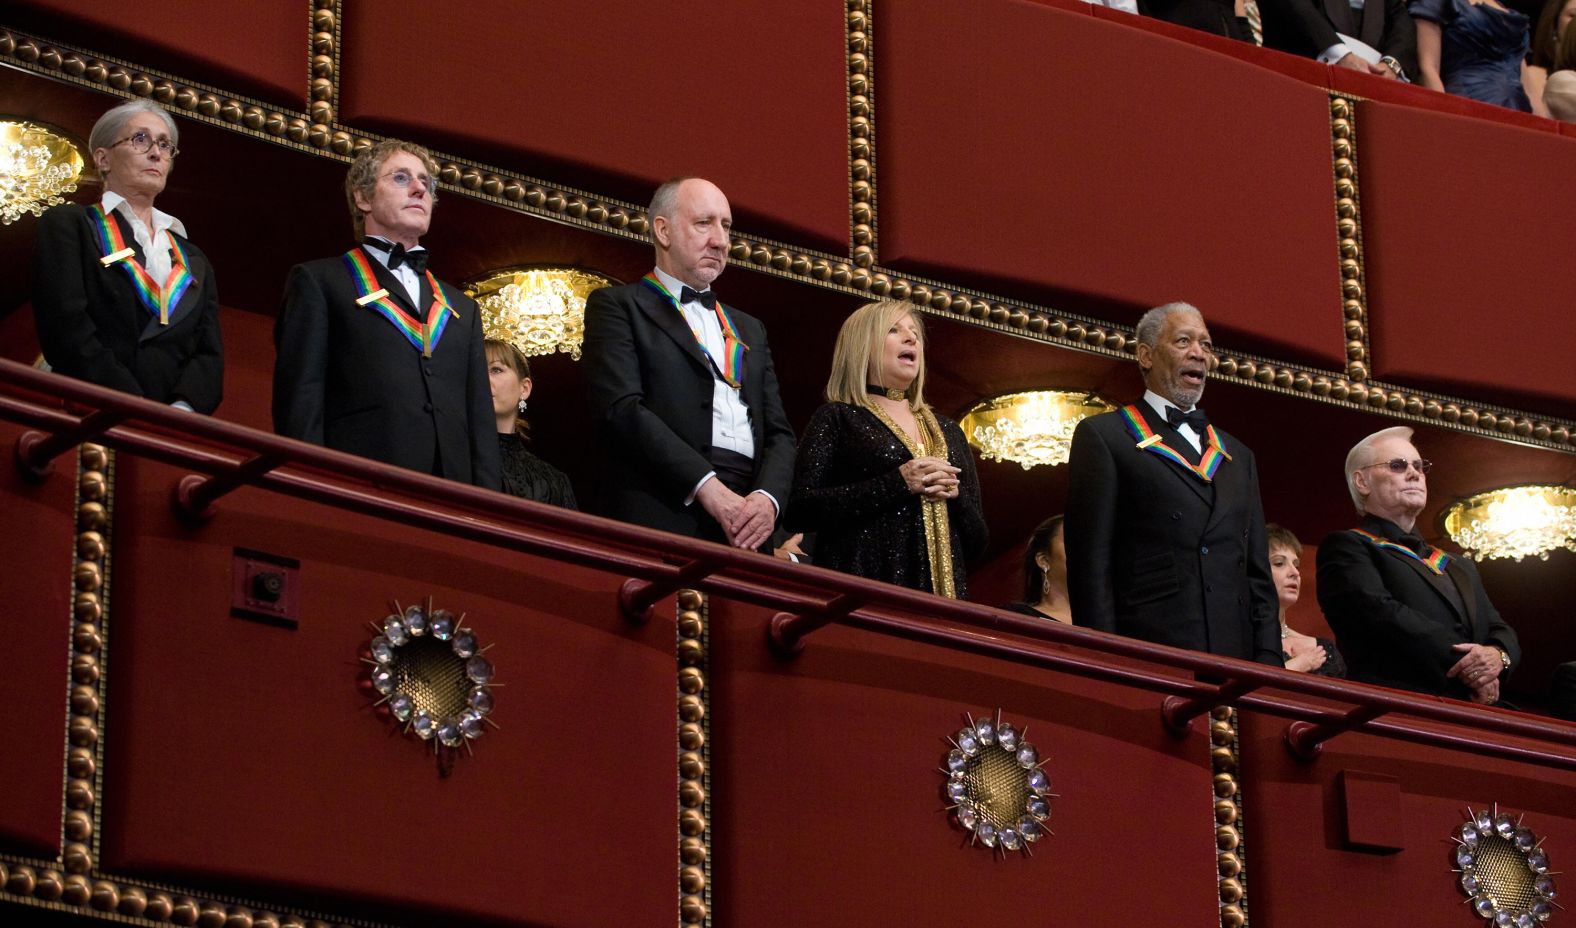 Streisand stands alongside fellow Kennedy Center Honors award recipients in 2008. With her, from left, are choreographer Twyla Tharp, musicians Roger Daltrey and Pete Townshend of The Who, actor Morgan Freeman and singer George Jones.